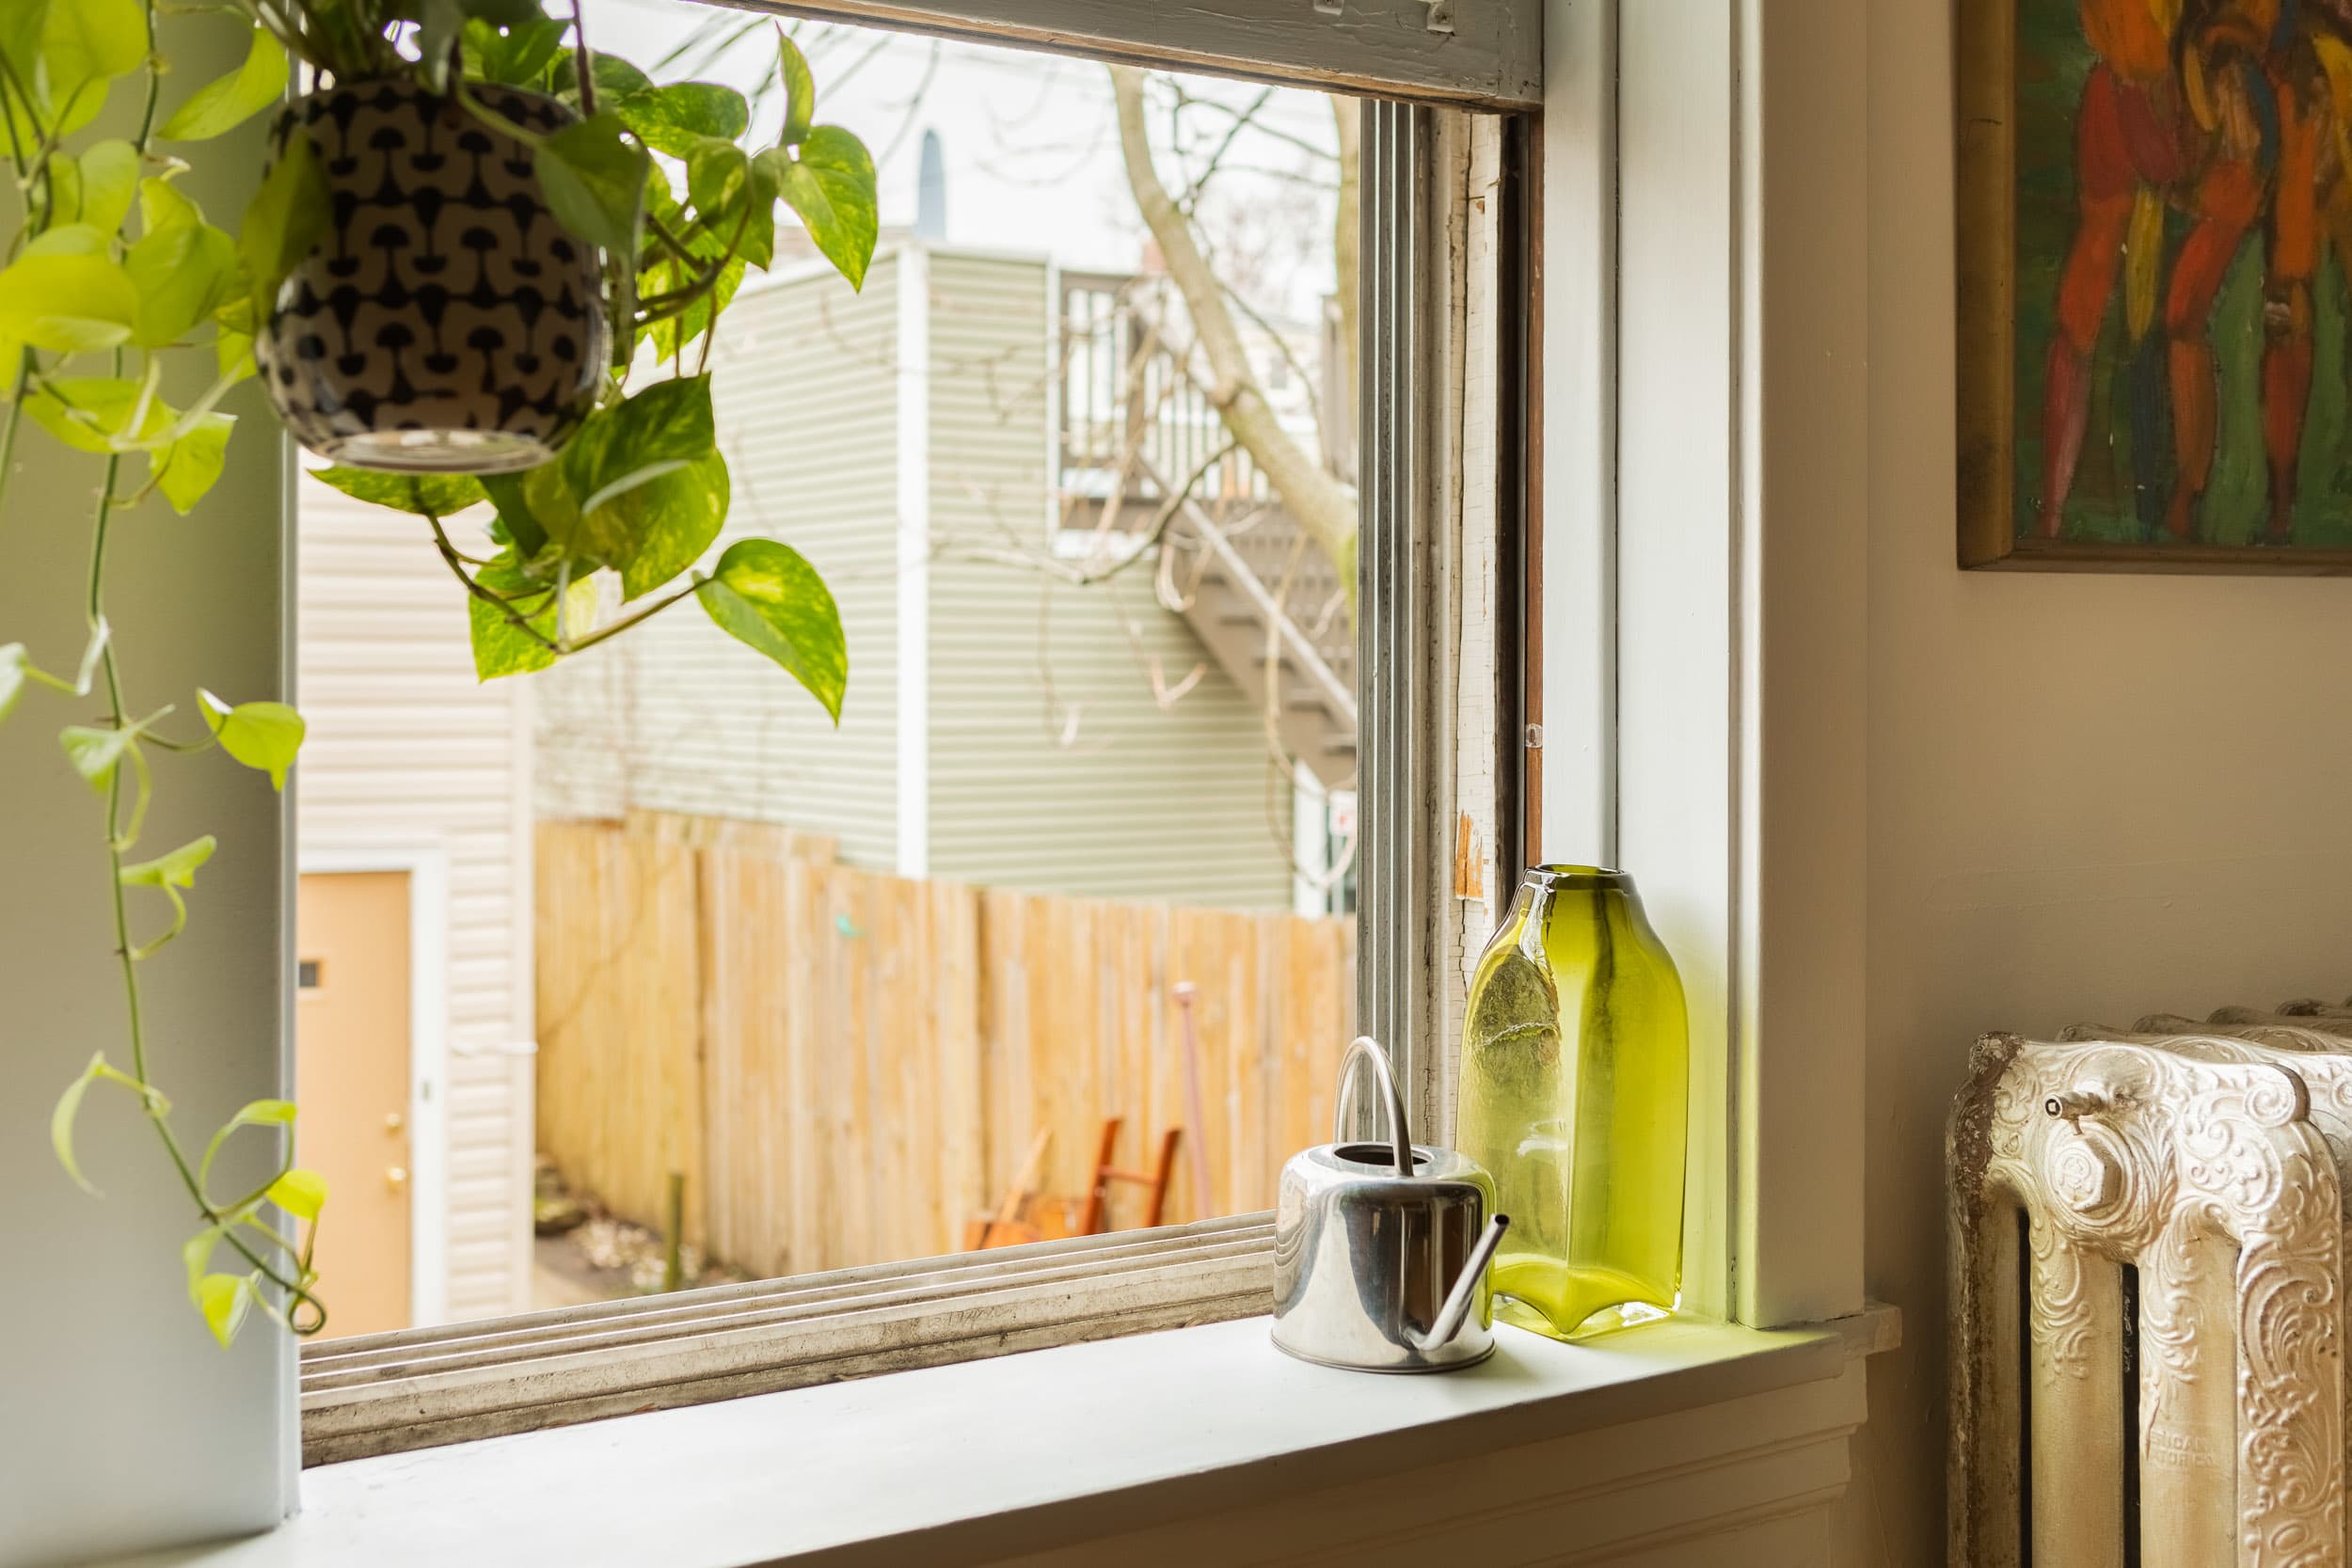 How-to Clean Window Sills (Easy Household Cleaning Ideas That Save